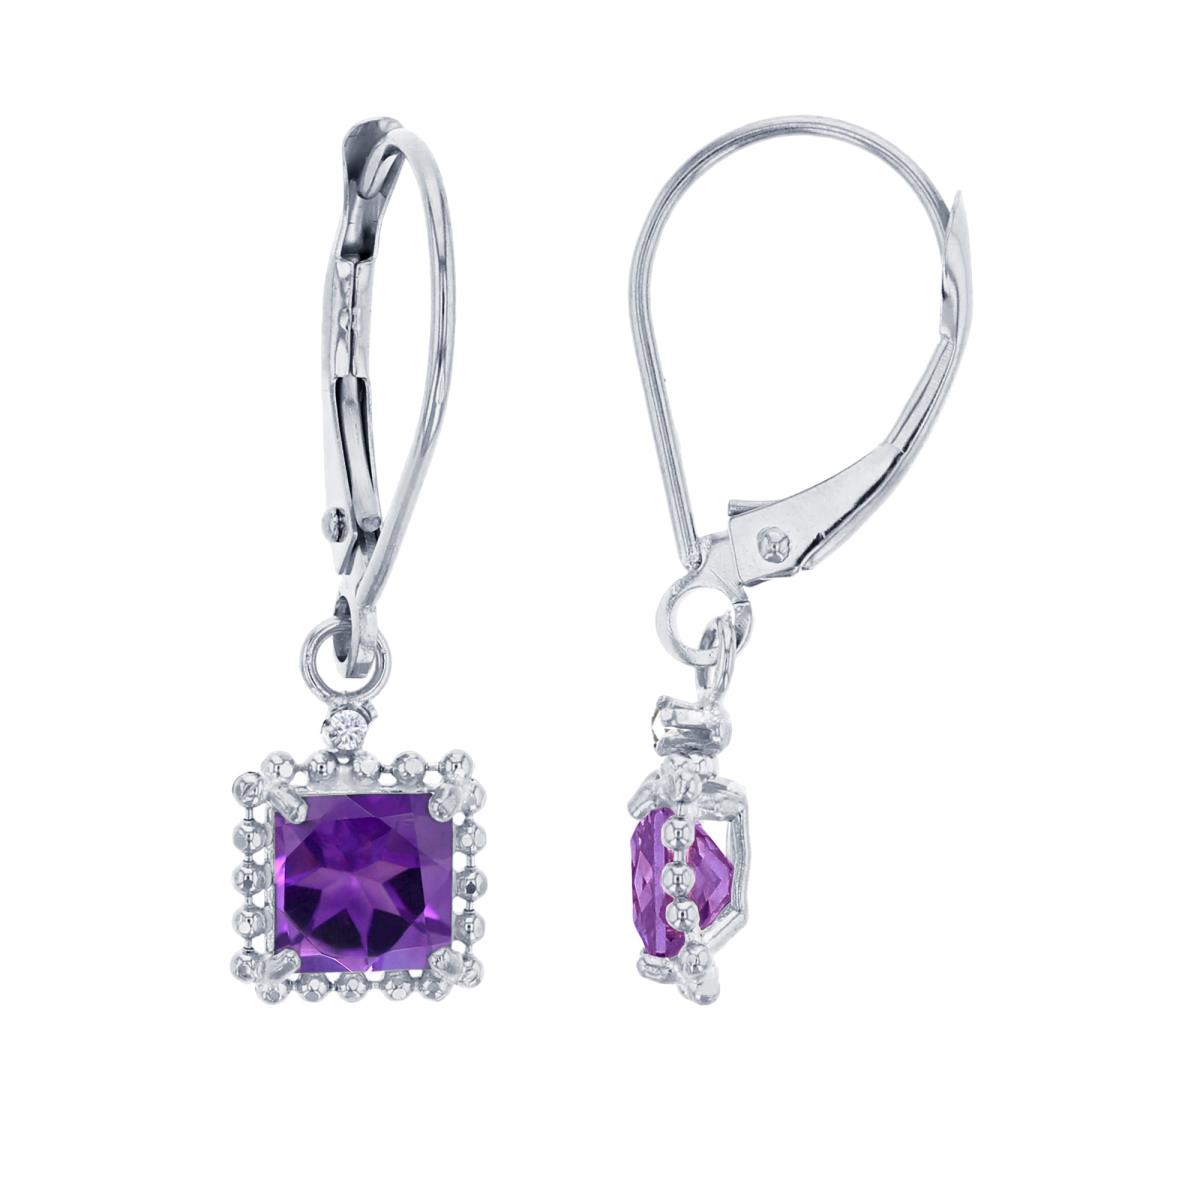 14K White Gold 1.25mm Rd Created White Sapphire & 5mm Sq Amethyst Bead Frame Drop Lever-Back Earring